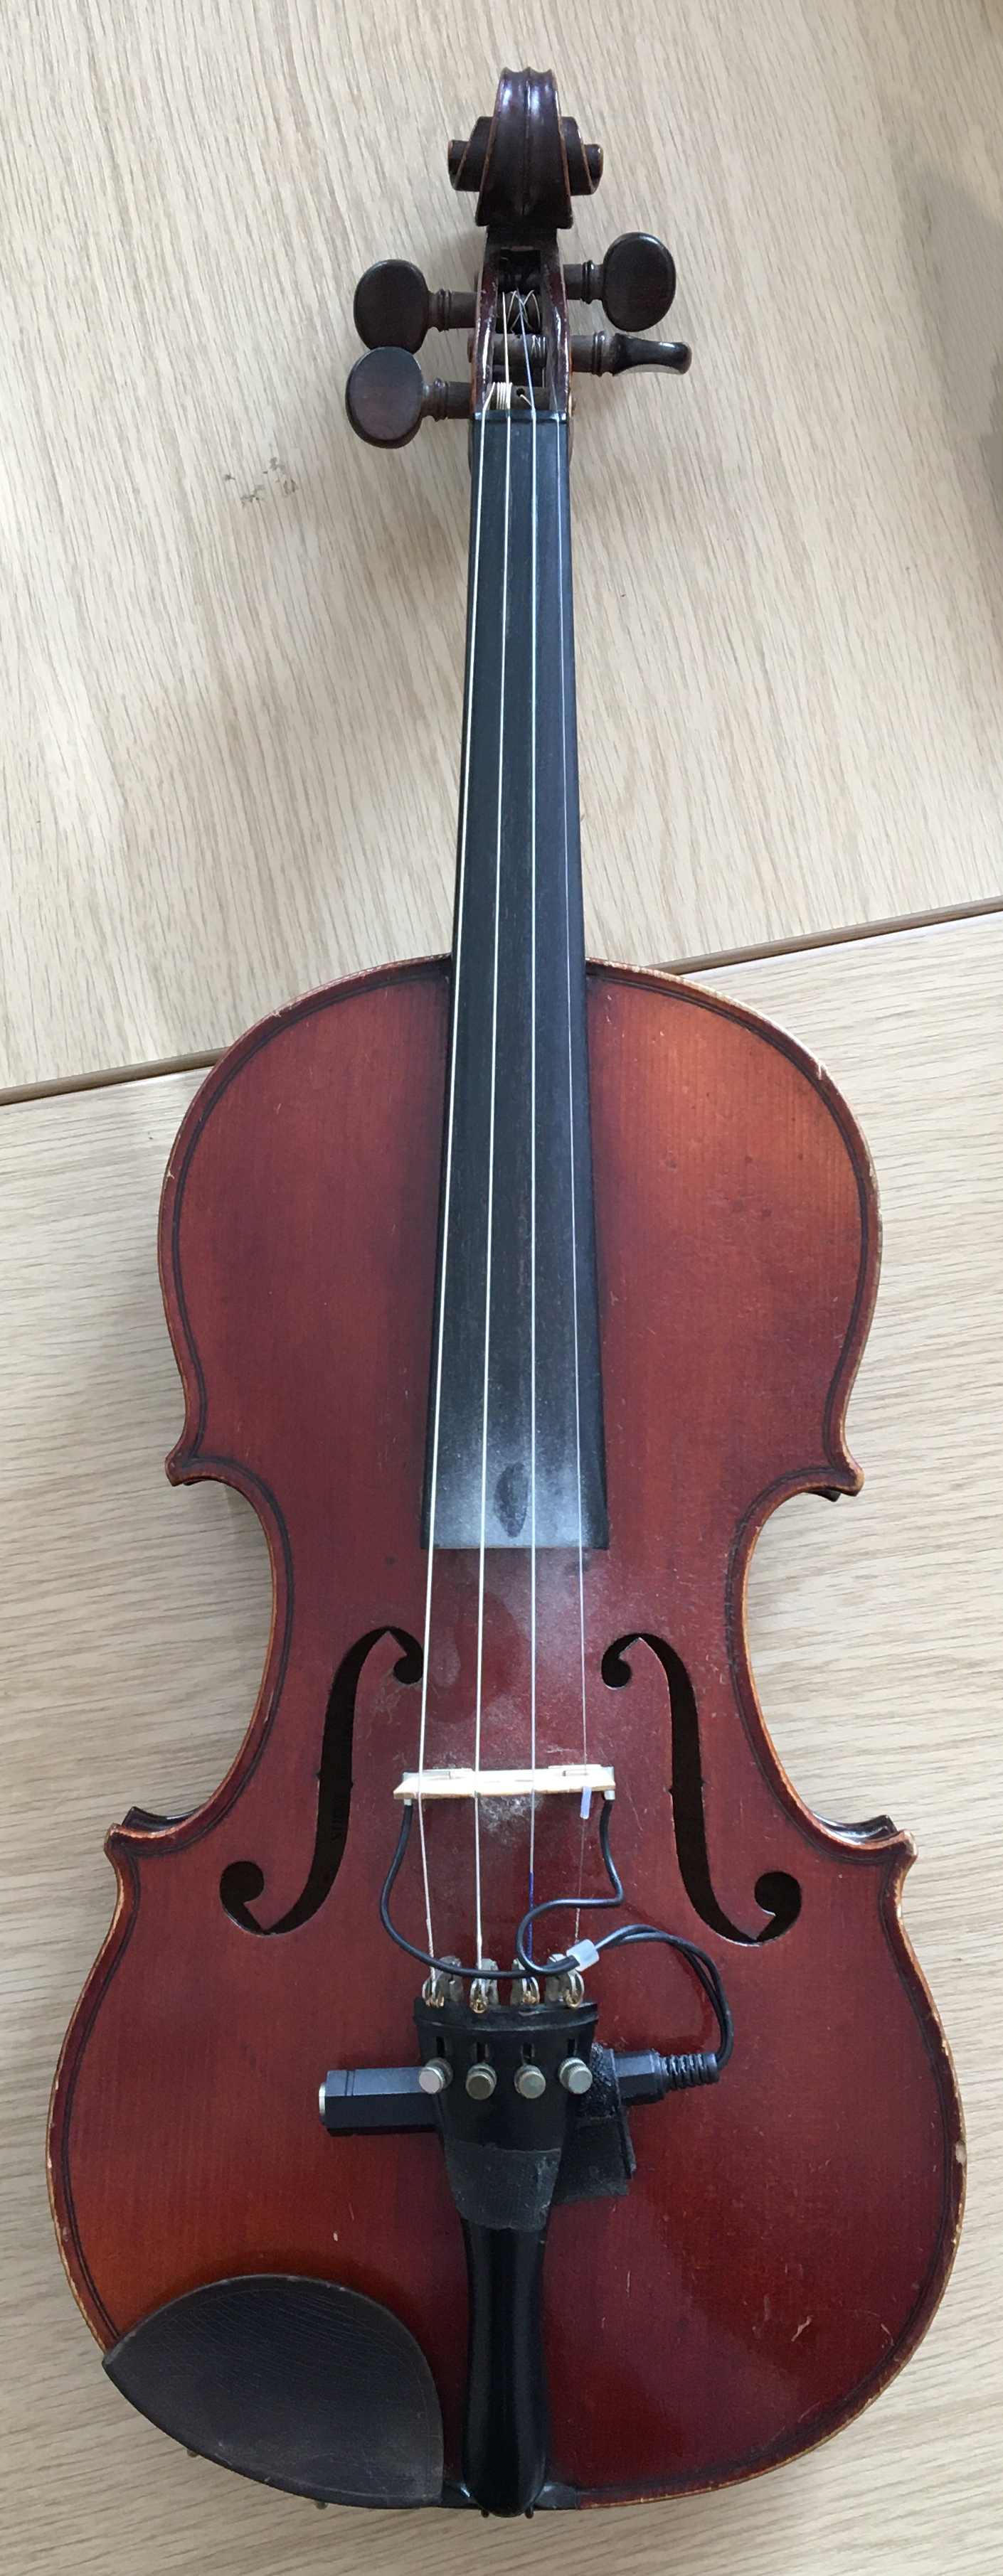 A c.1900 violin, bears label for Mansuy a Paris, one piece 14" back, in hard case with two bows, one